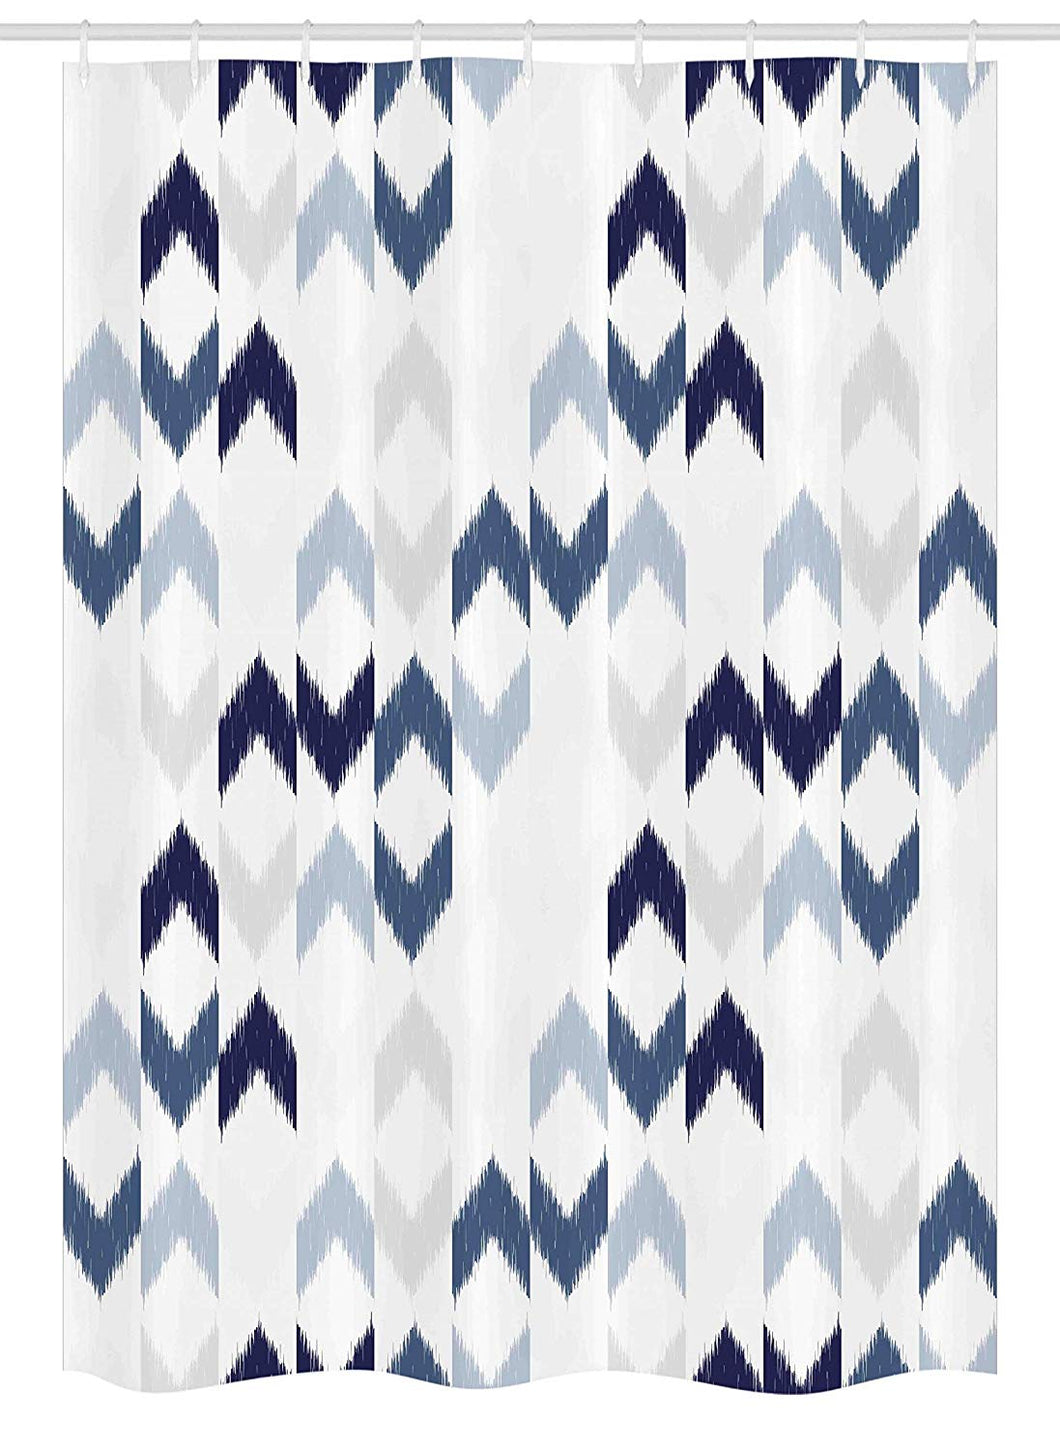 Ambesonne Navy Stall Shower Curtain, Abstract Ikat Chevron with Hazy Zigzag Folk Traditional Image, Fabric Bathroom Decor Set with Hooks, 54